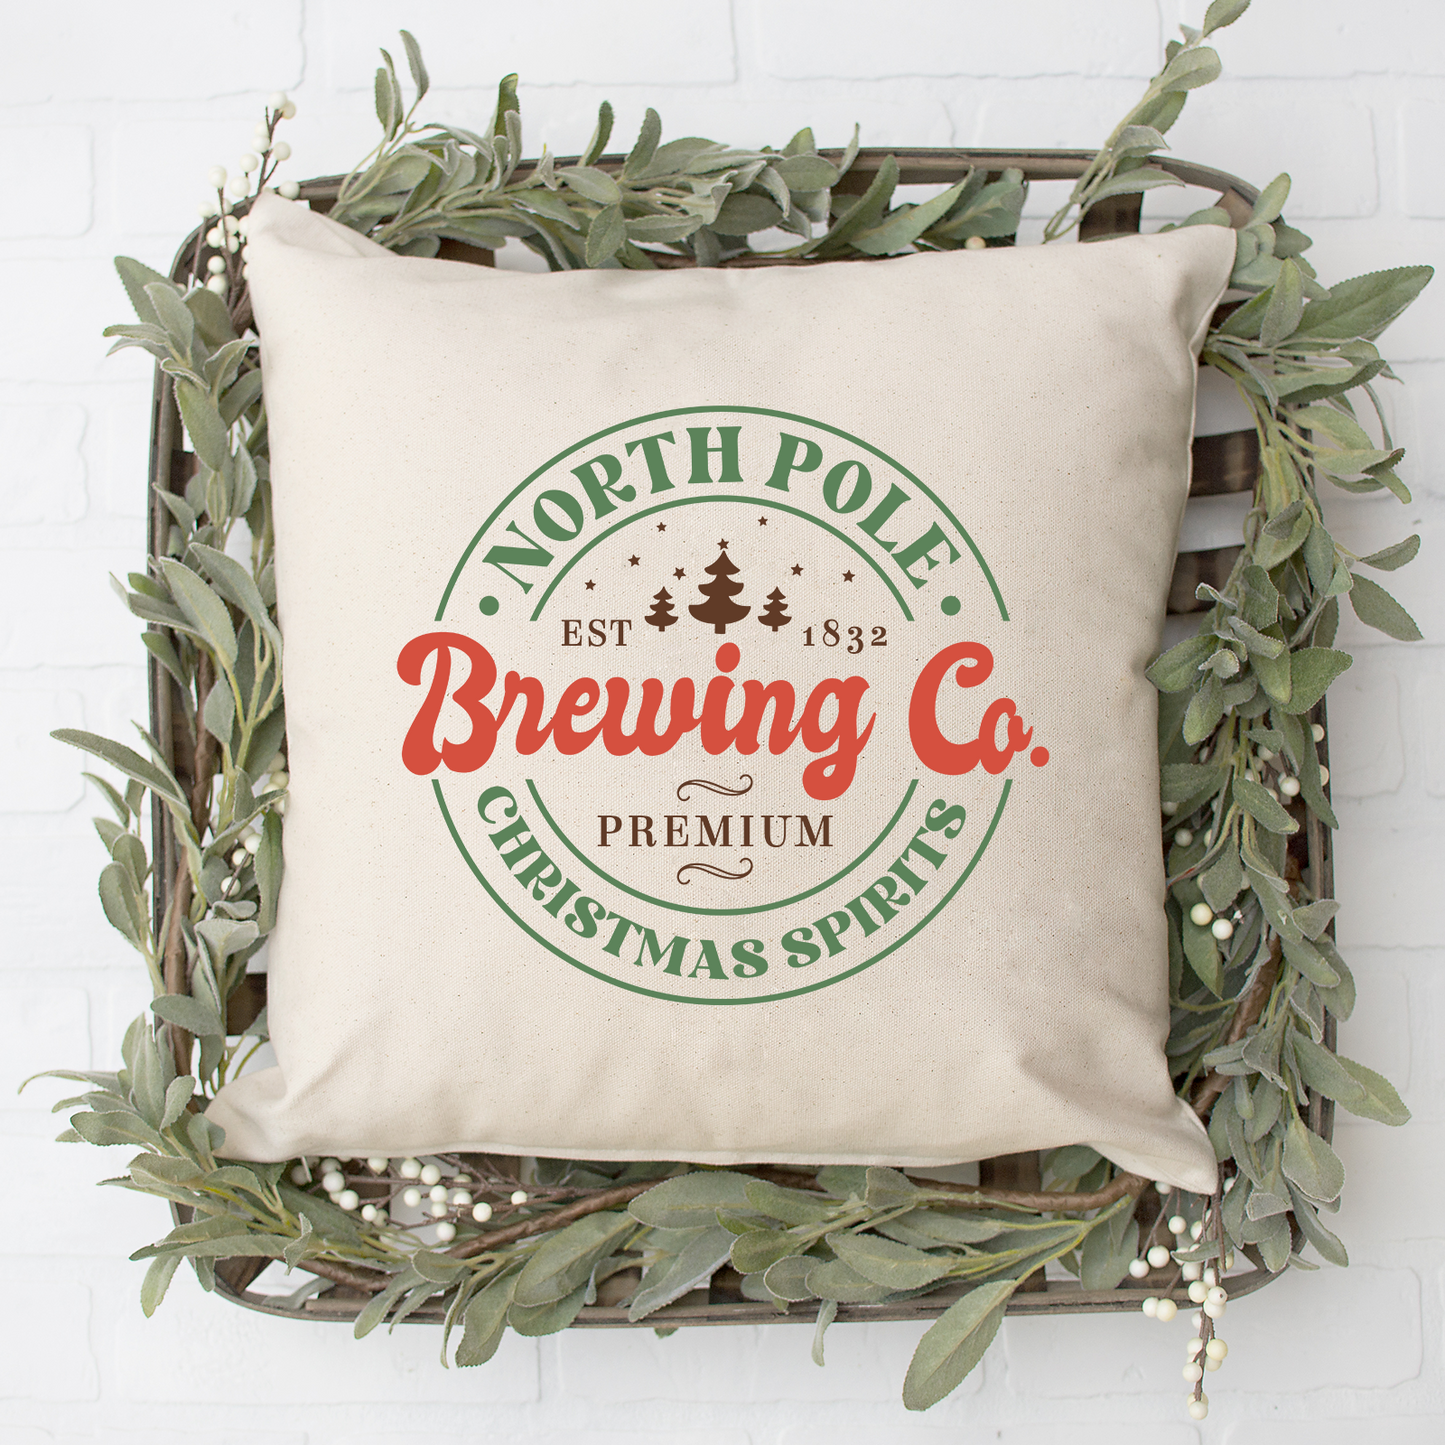 North Pole Brewing Co Pillow